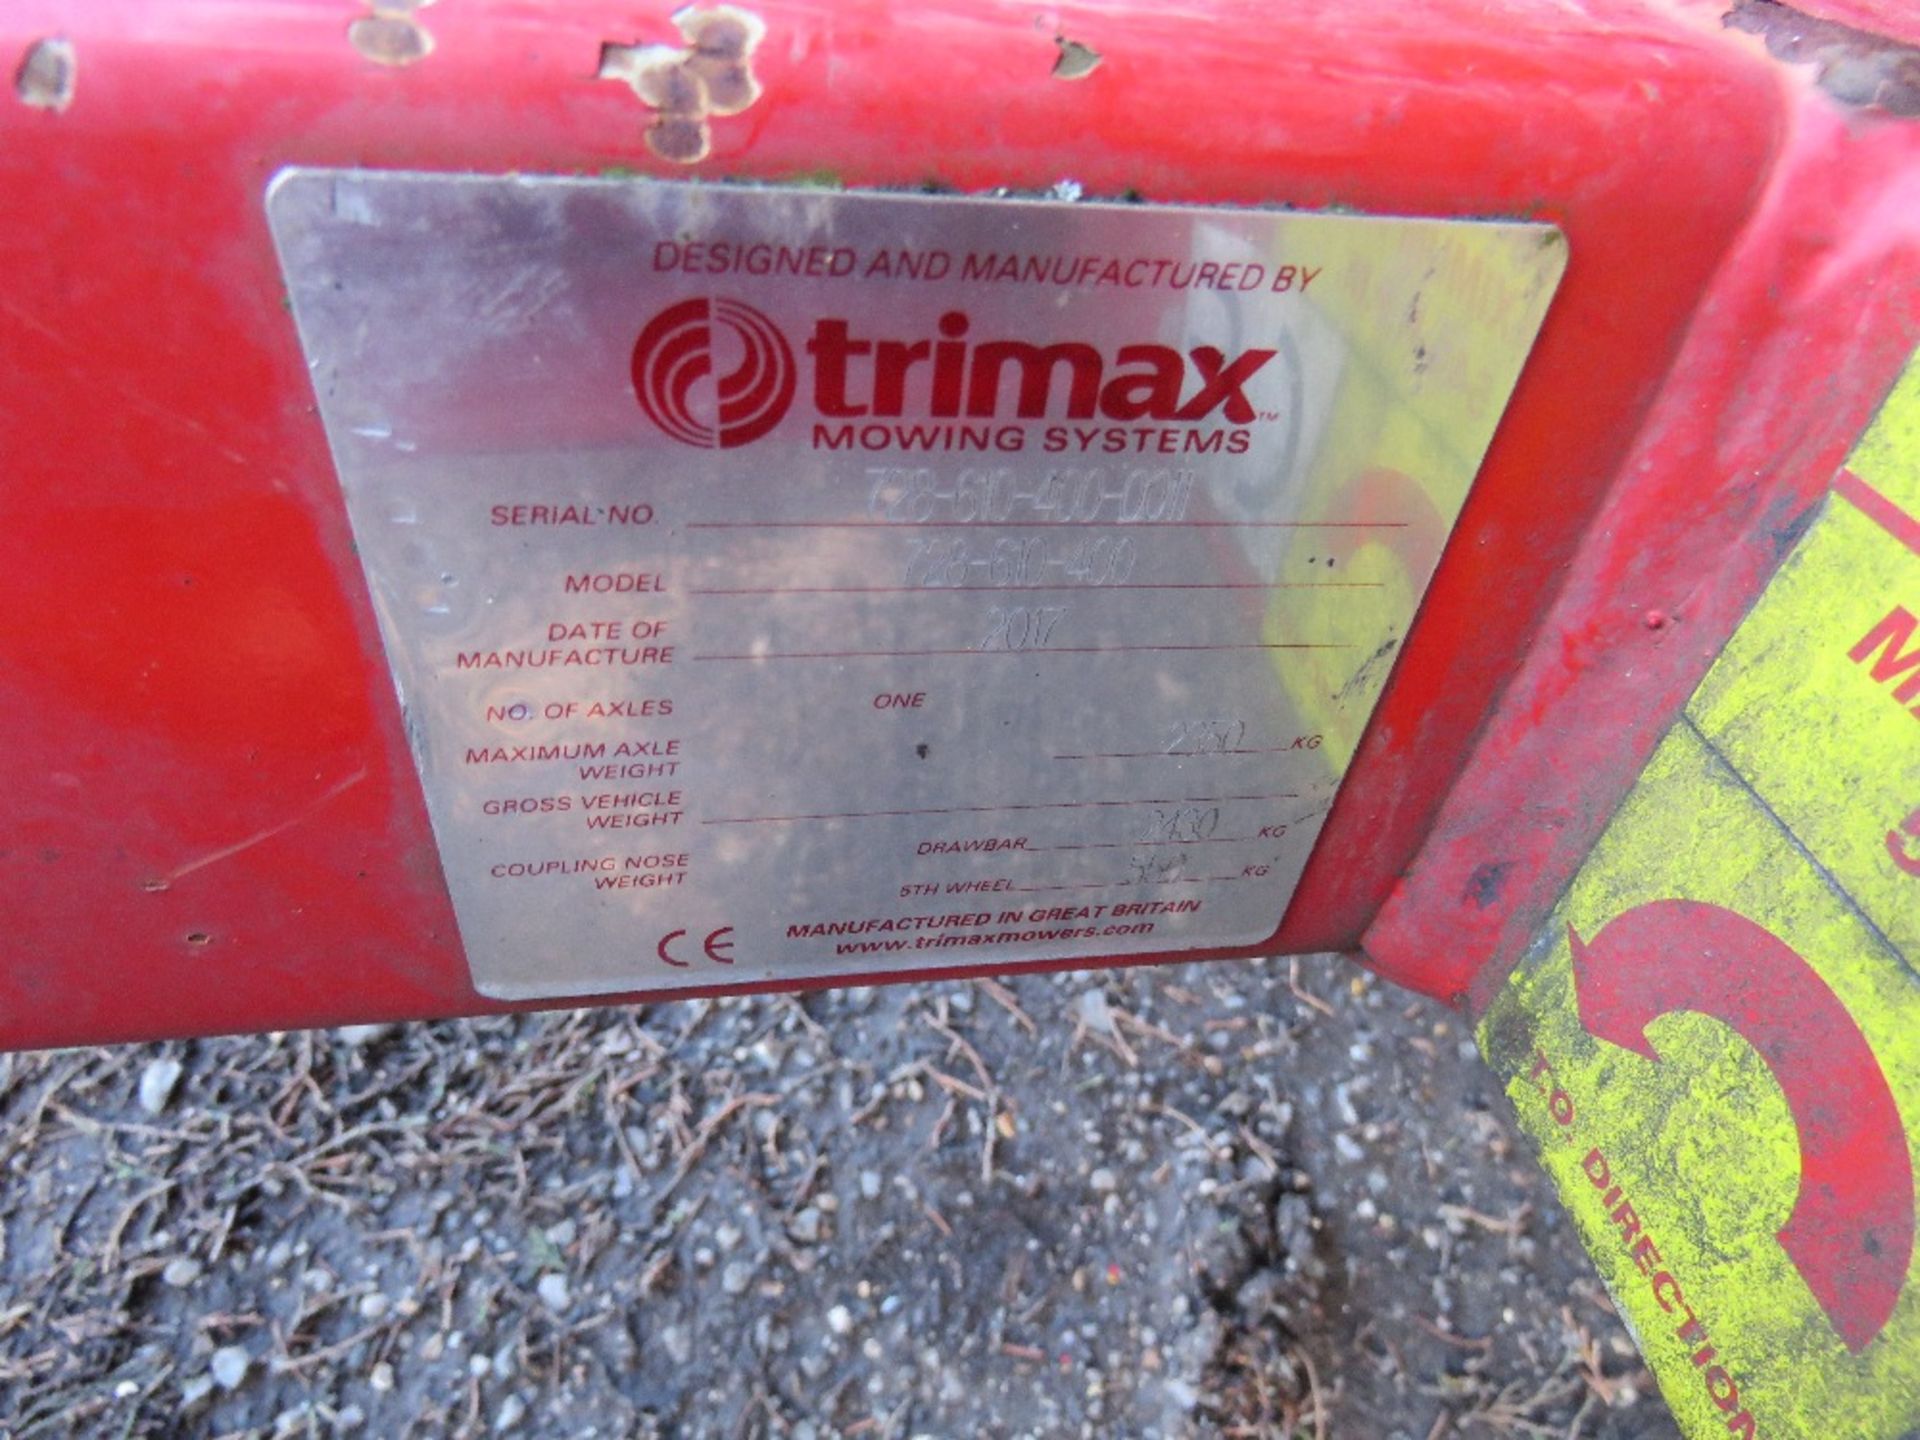 TRIMAX 728-610-400 BATWING TYPE ROLLER MOWER, YEAR 2017. PEGASUS S3 HEADS. NB: REQUIRES REPAIR TO CH - Image 2 of 9